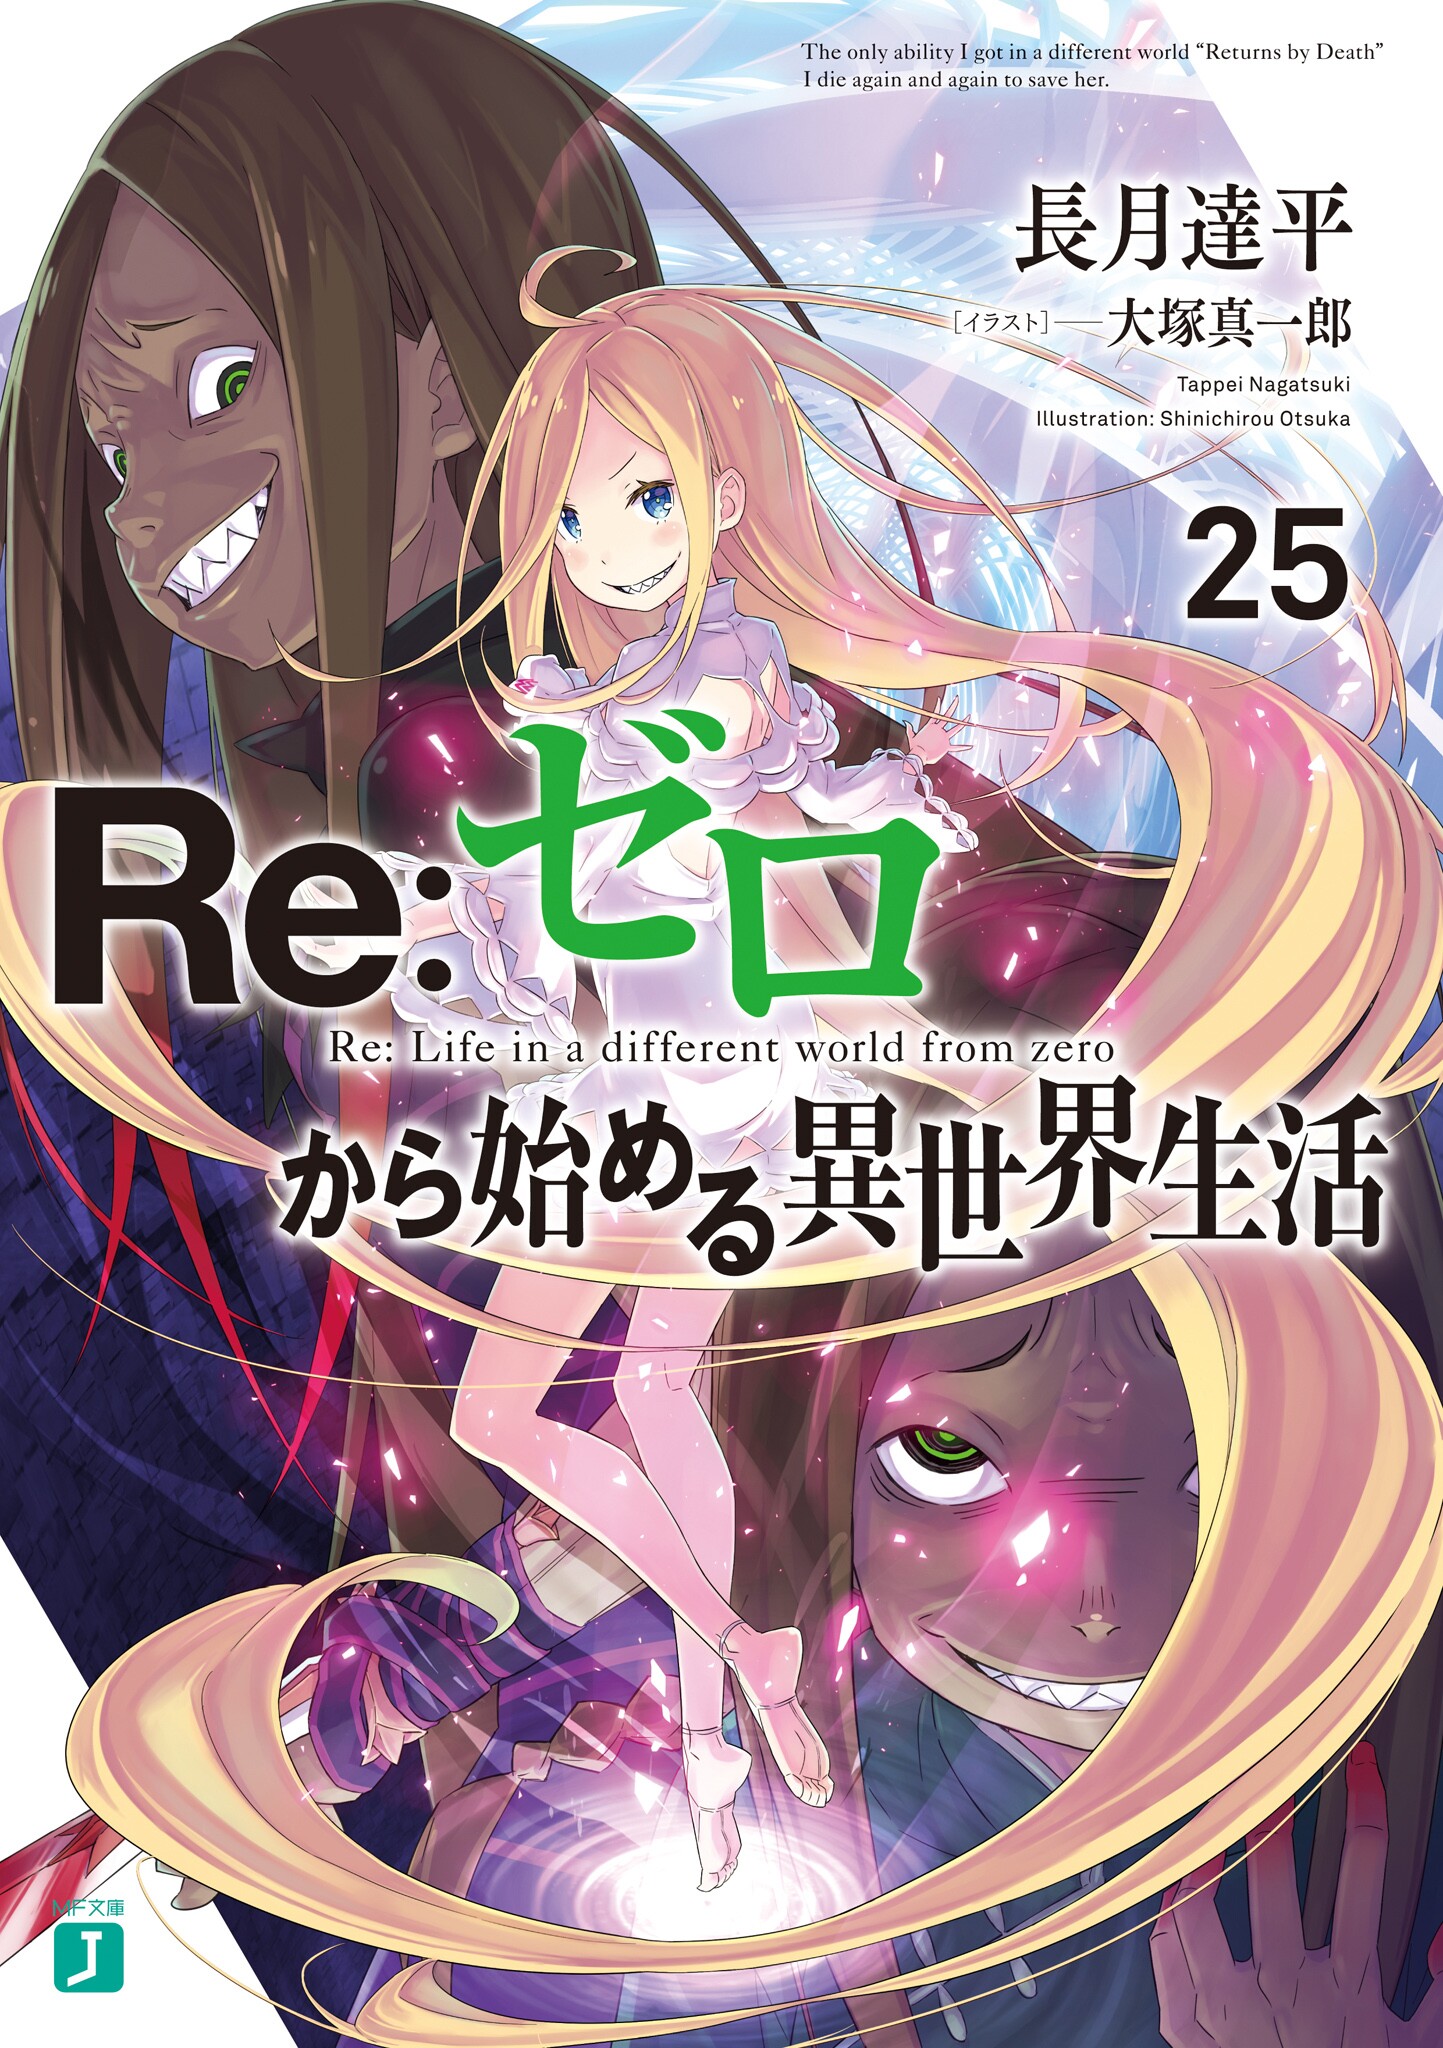  Re:ZERO -Starting Life in Another World-, Chapter 2: A Week at  the Mansion, Vol. 3 (manga) (Re:ZERO -Starting Life in Another World-,  Chapter 2: A Week at the Mansion Manga, 3)